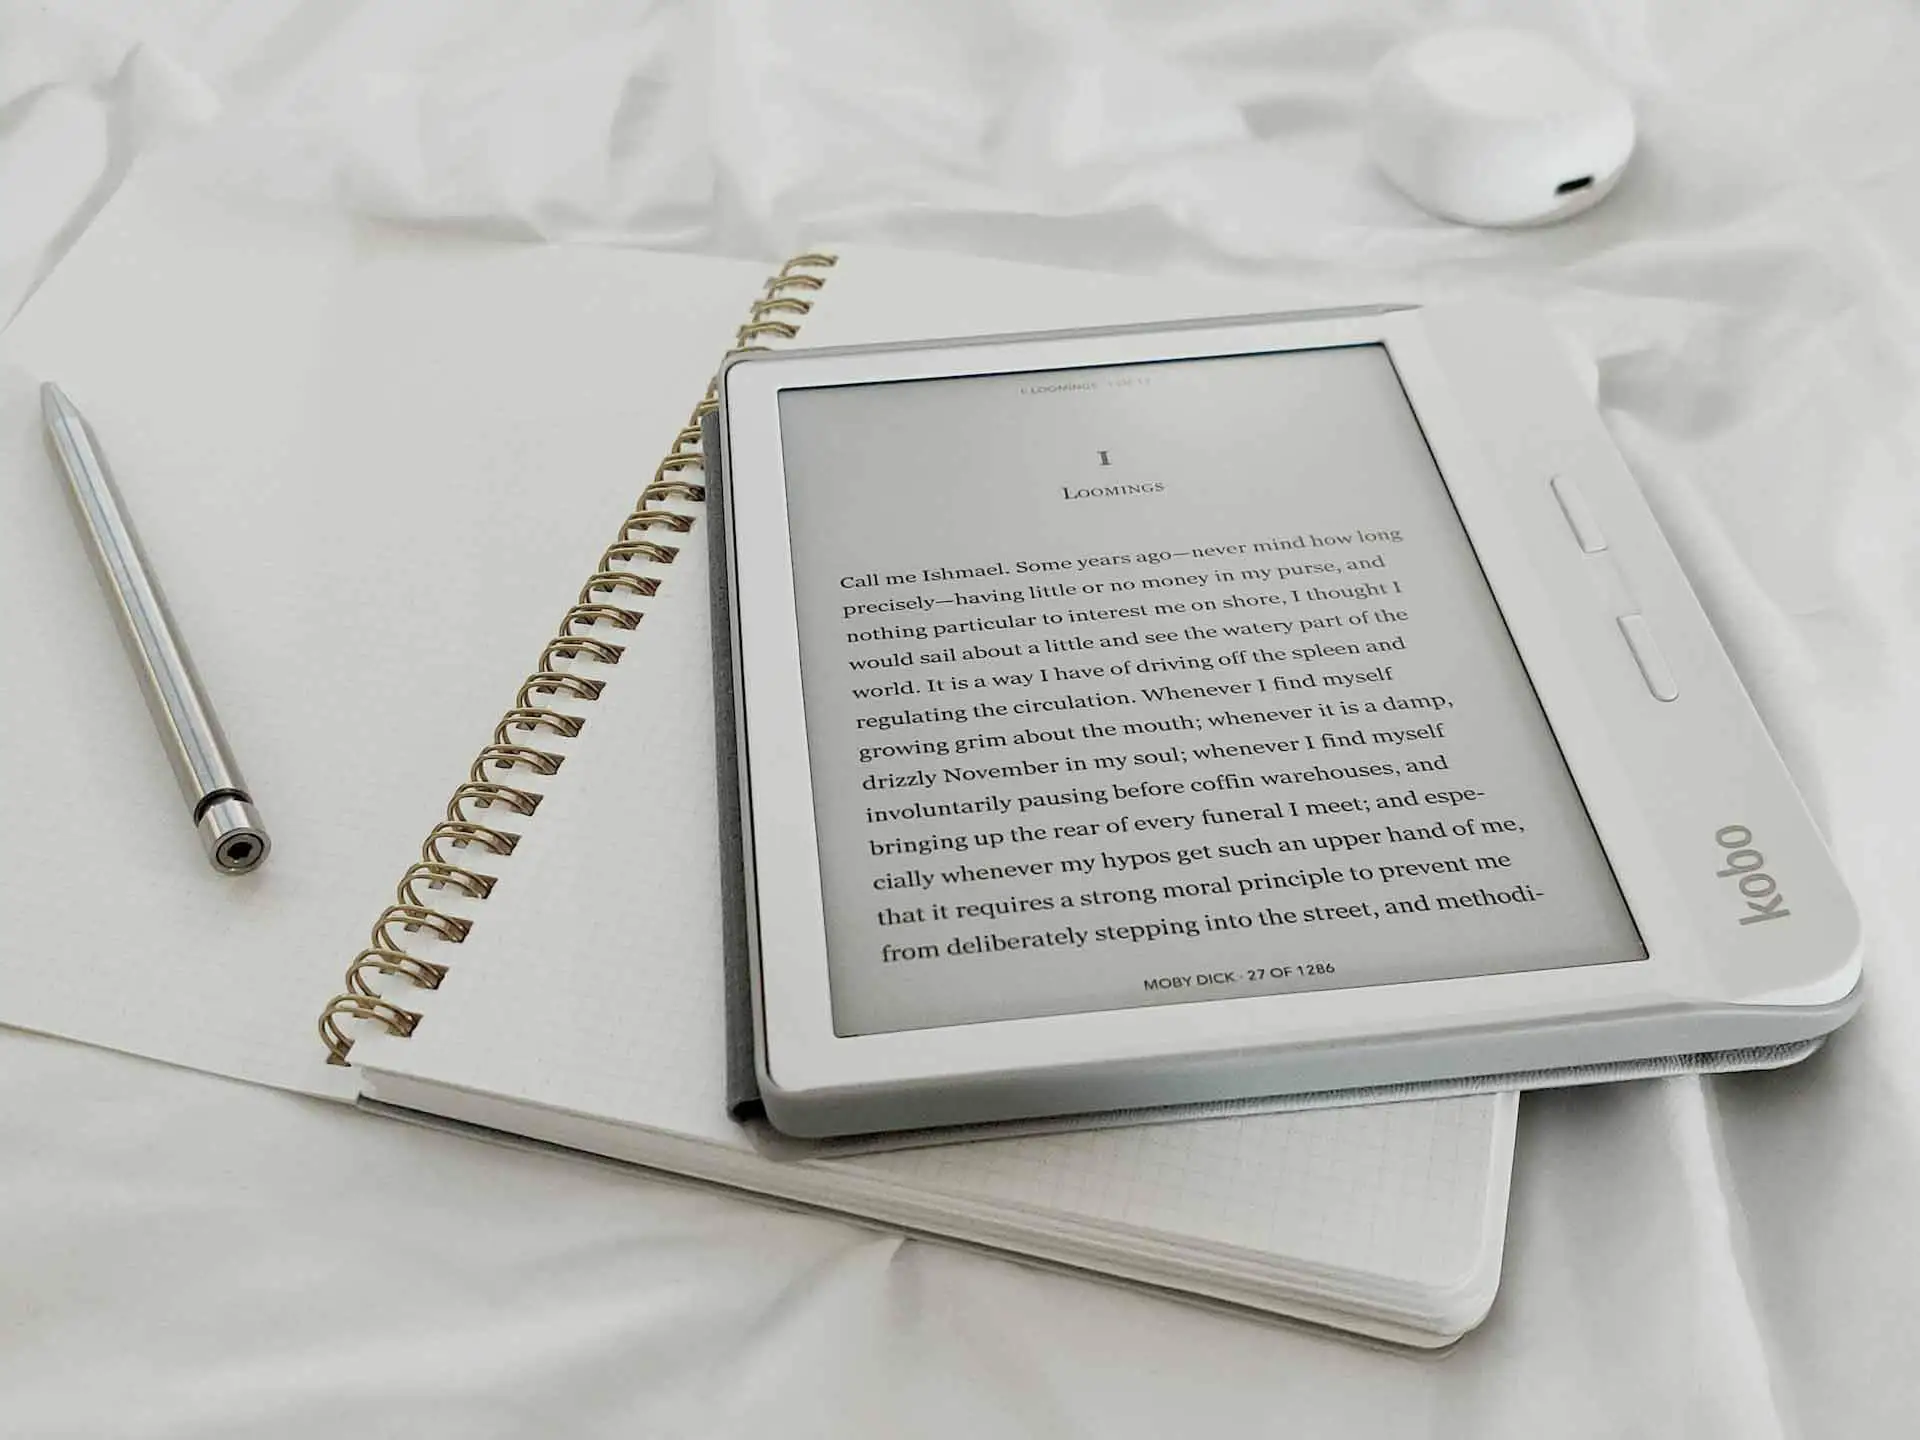 Table screen showing a page of ebook written by an agency of ghostwriting services.